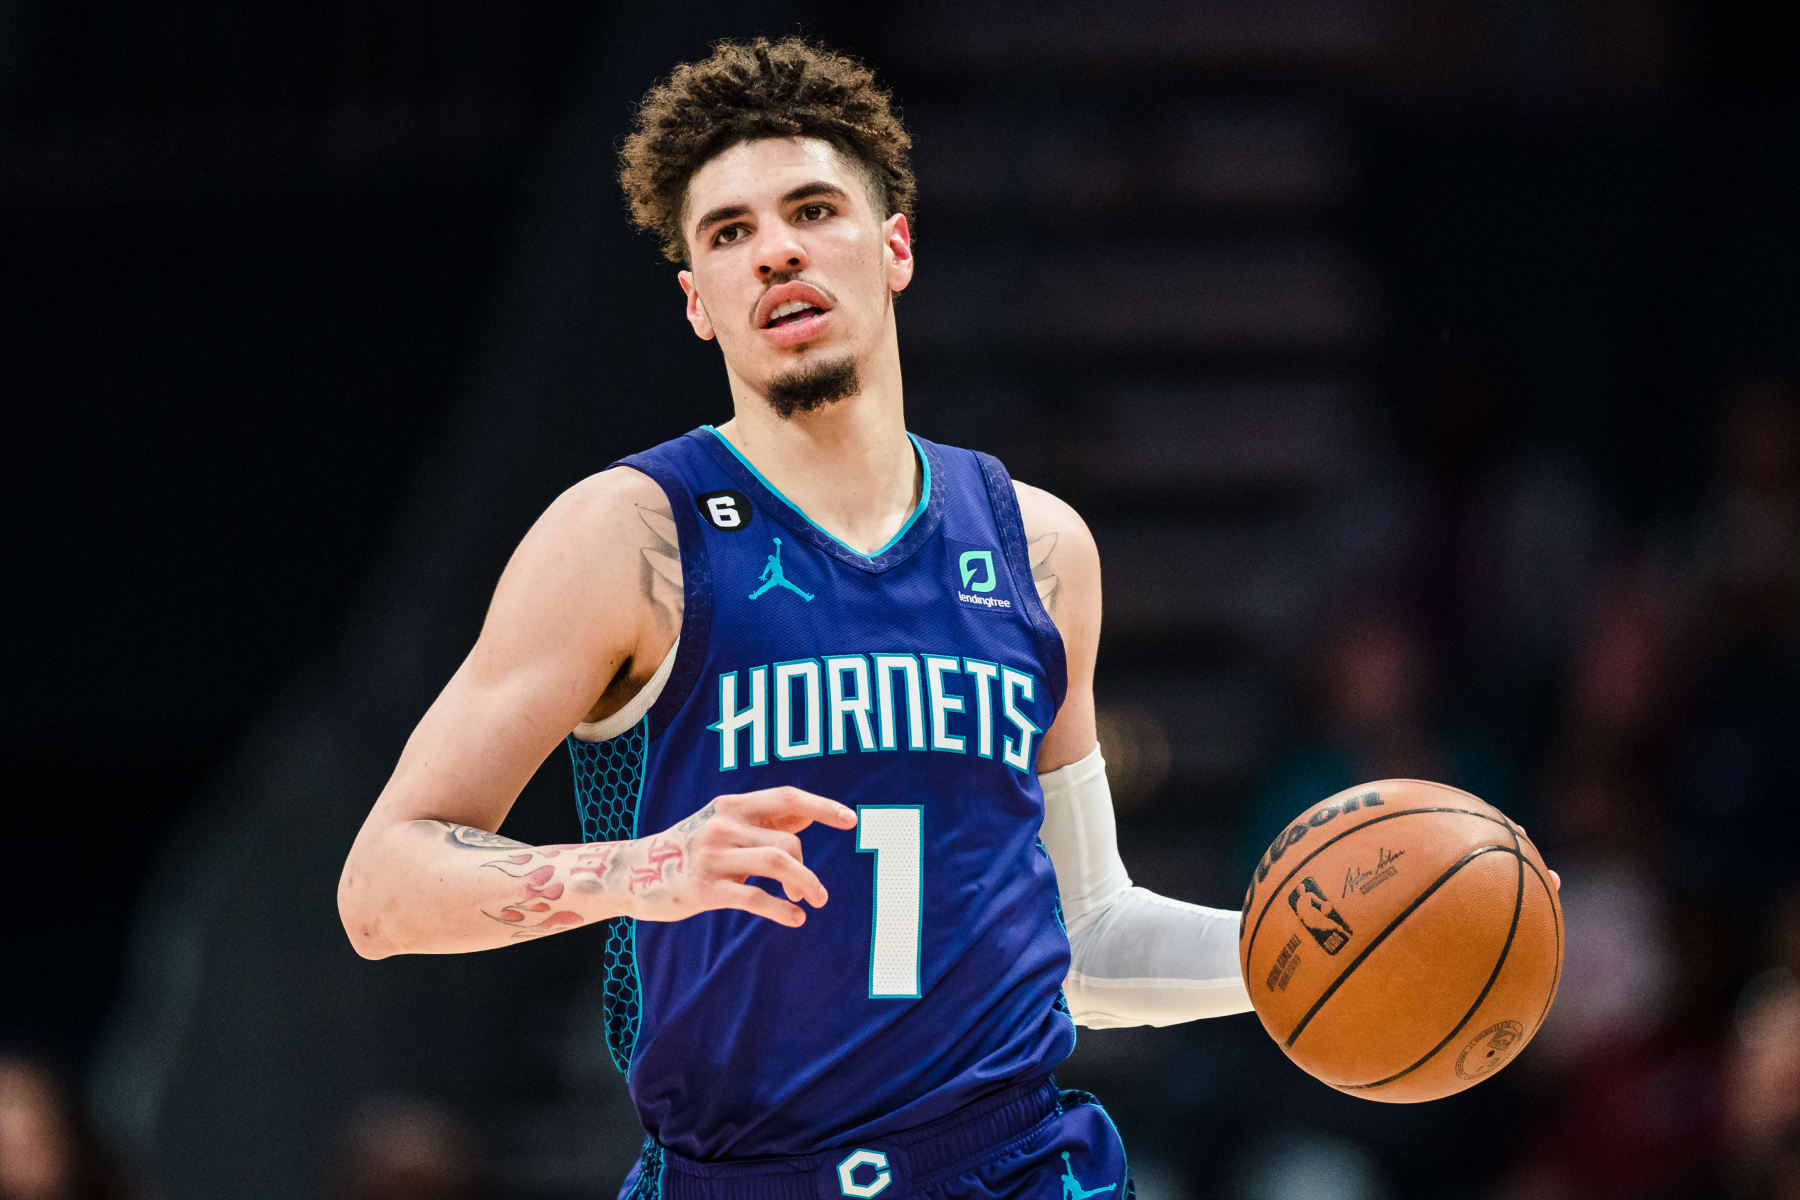 LaMelo Ball's Bold Comeback NBA Lifts Fine on Star's 'LF' Tattoo Amidst High-Profile Return to Hornets